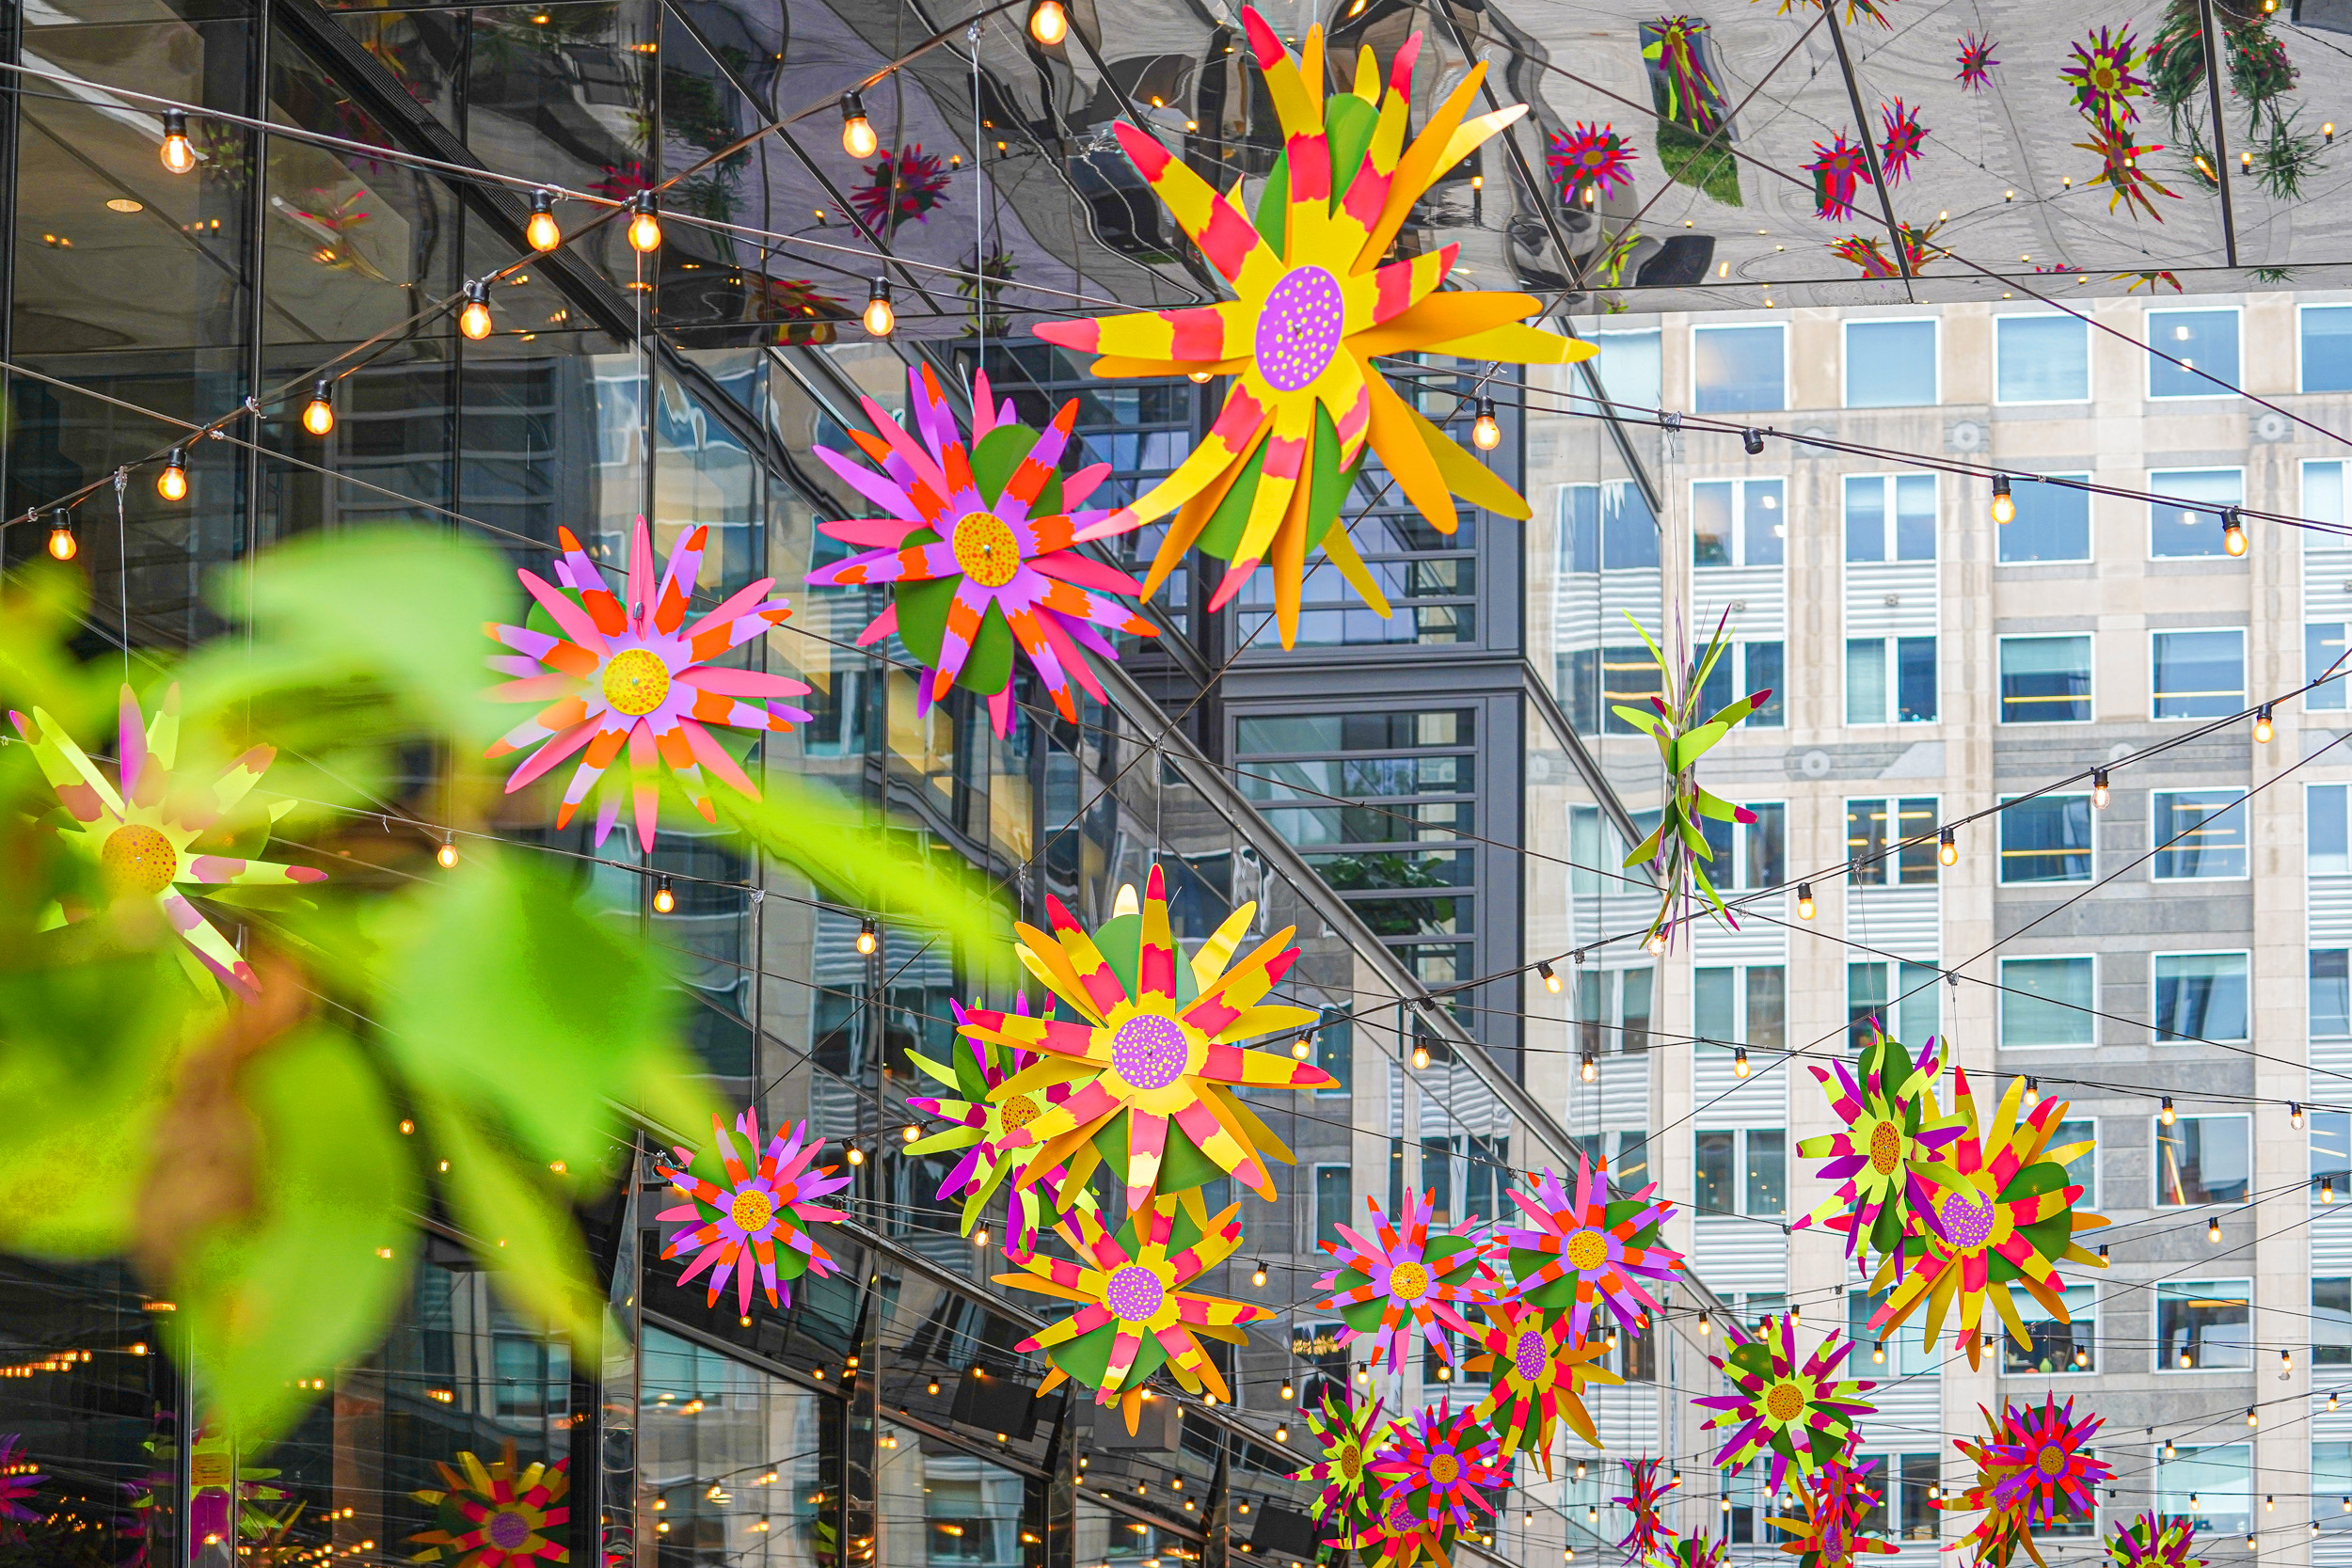 Coneflower Installation by the local artist Phaan Howng